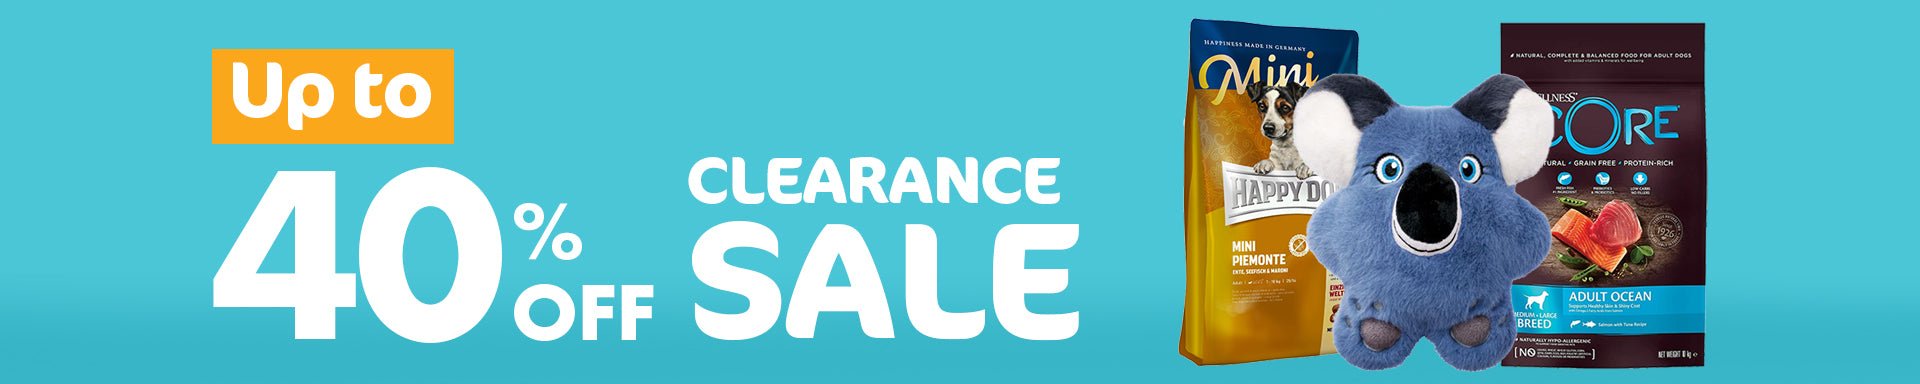 Clearance sale collection of pet products including food, toys, grooming supplies with discounts up to 40%